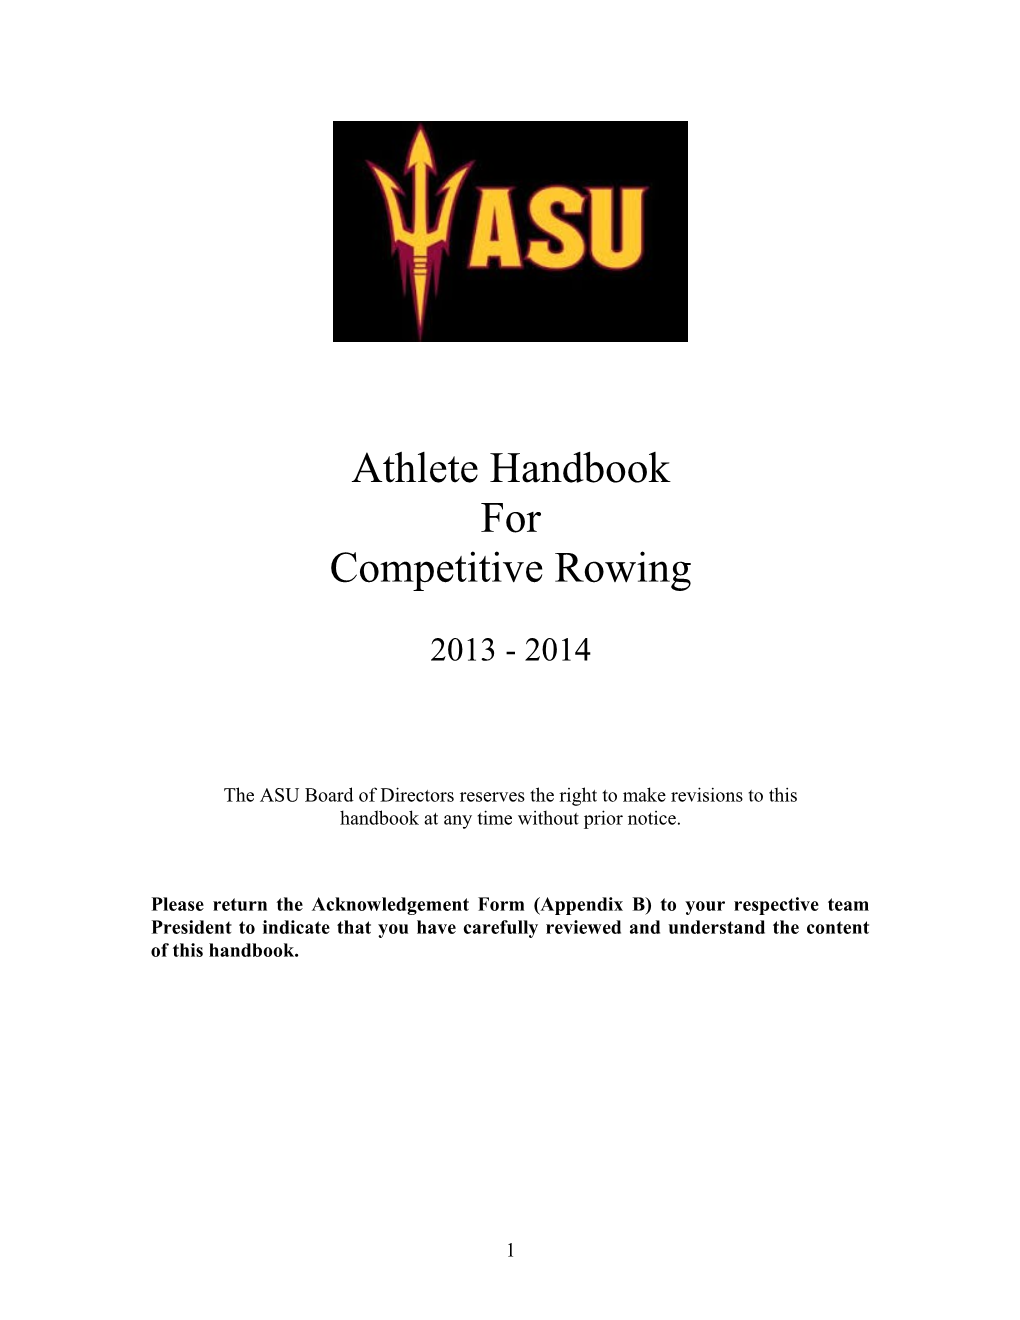 The ASU Board of Directors Reserves the Right to Make Revisions to This